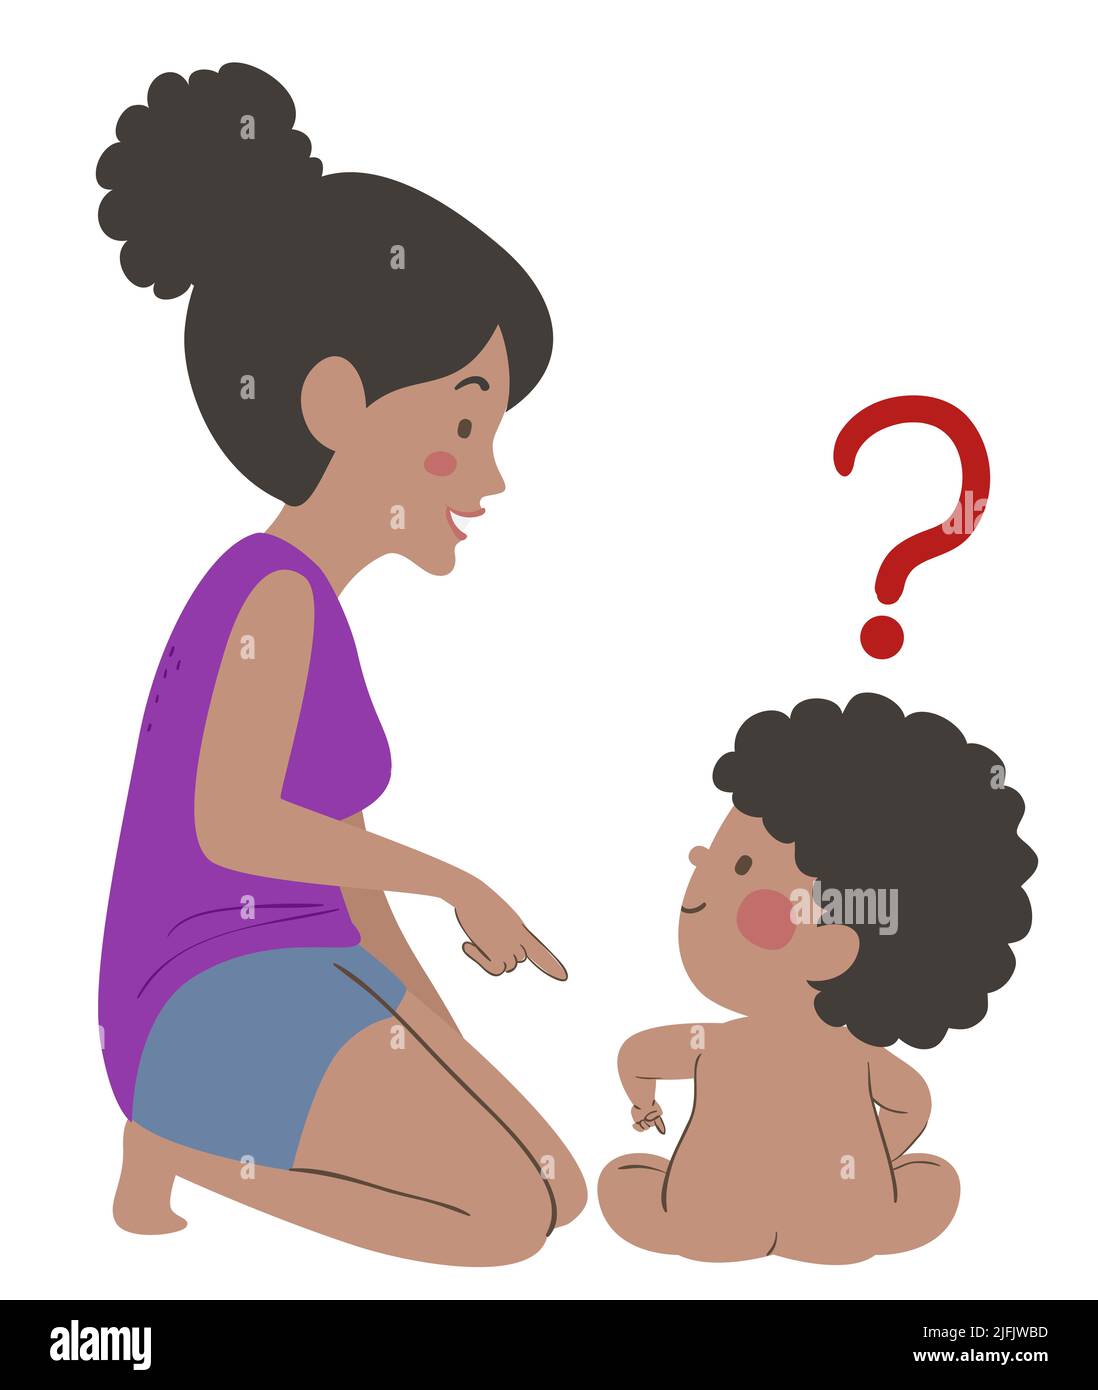 Illustration of African American Kid Boy Naked Sitting with Mom, Pointing and Asking Questions About His Private Body Part Stock Photo